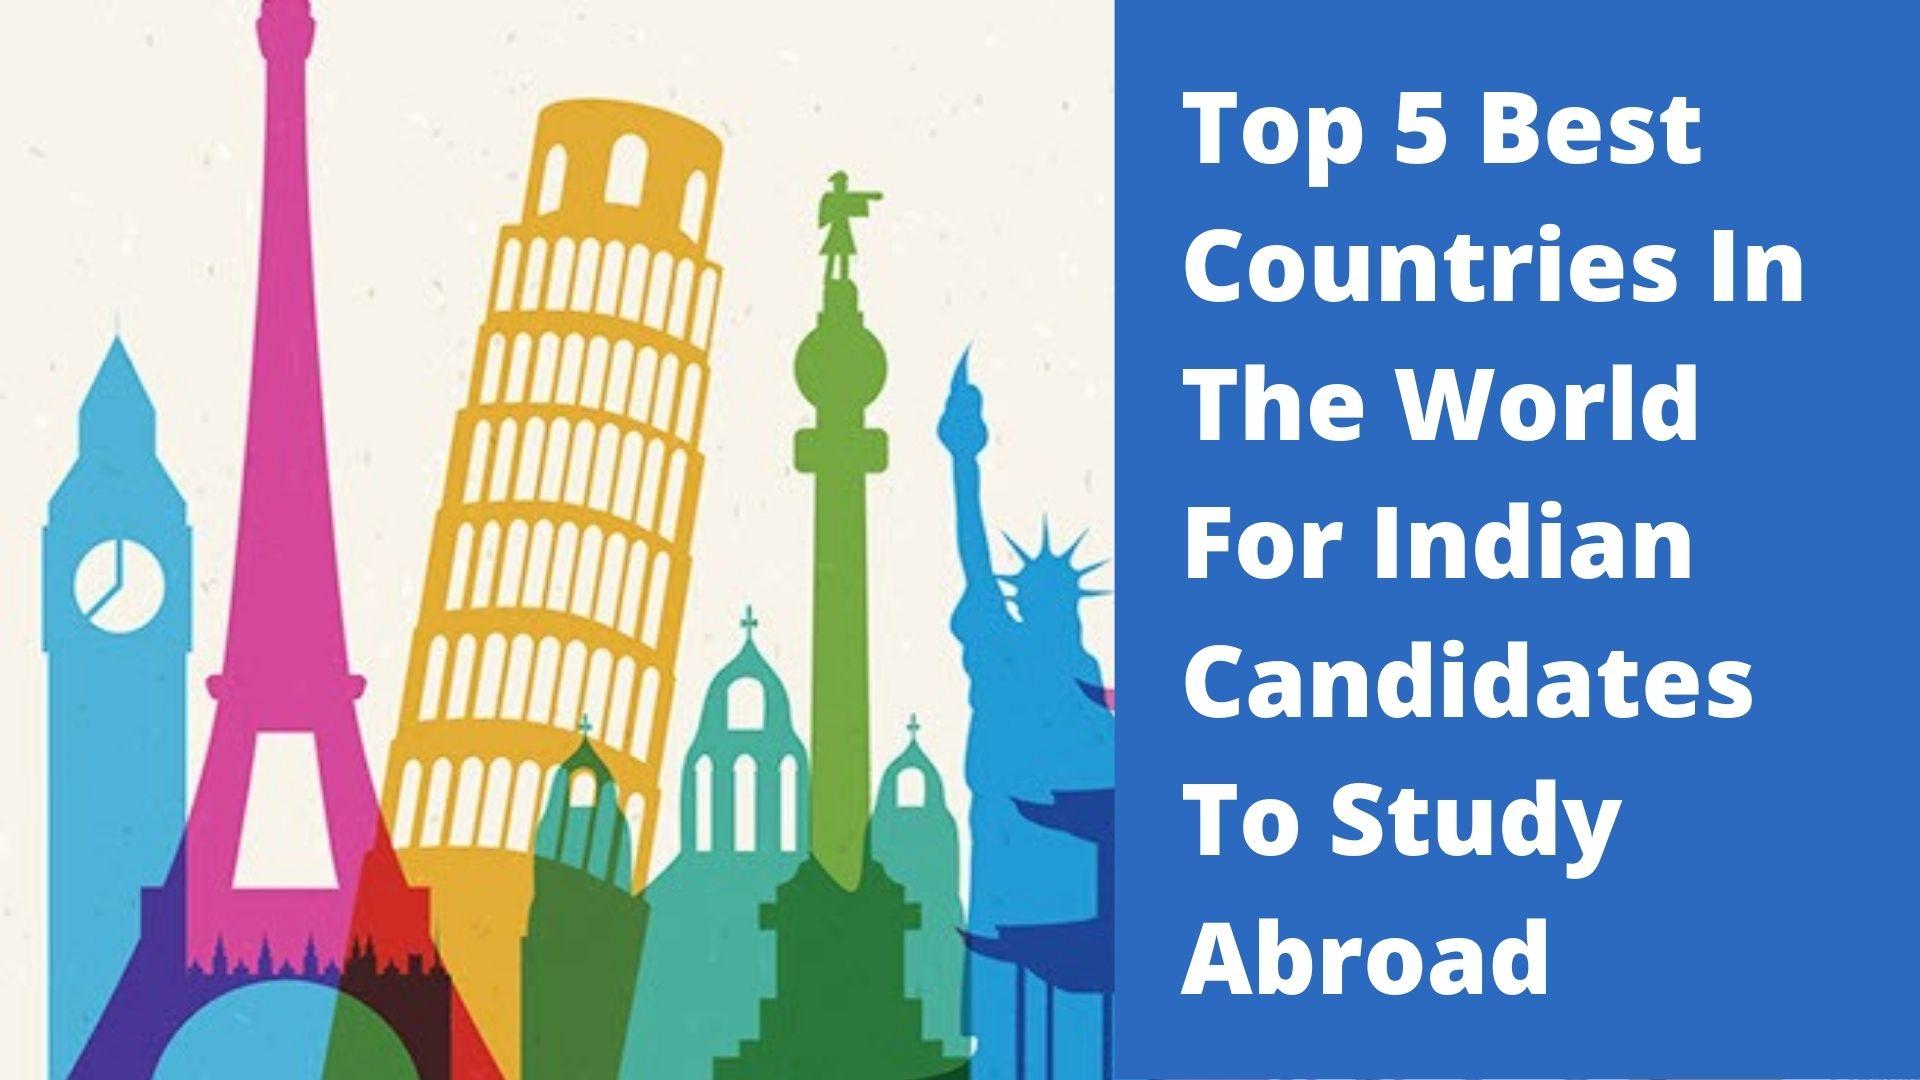 Top 5 best and affordable cities in the world for Indian candidates to study abroad.